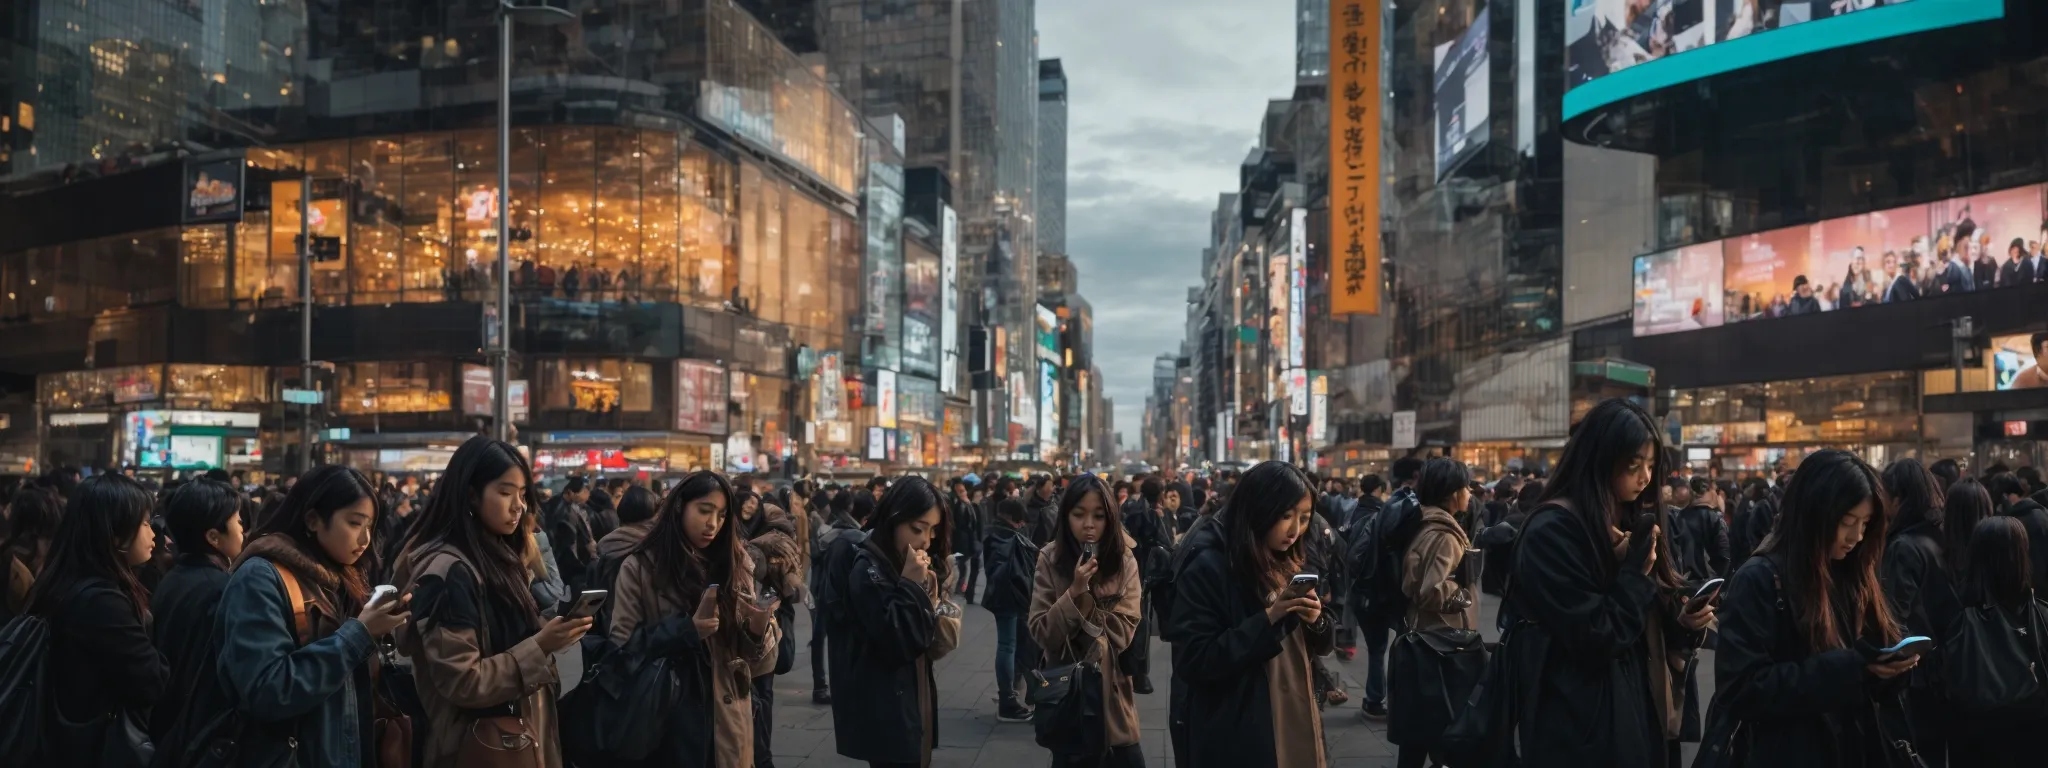 a bustling city scene with individuals immersed in their smartphones, with the focus on a prominent, brilliantly-lit billboard displaying a popular social media icon.